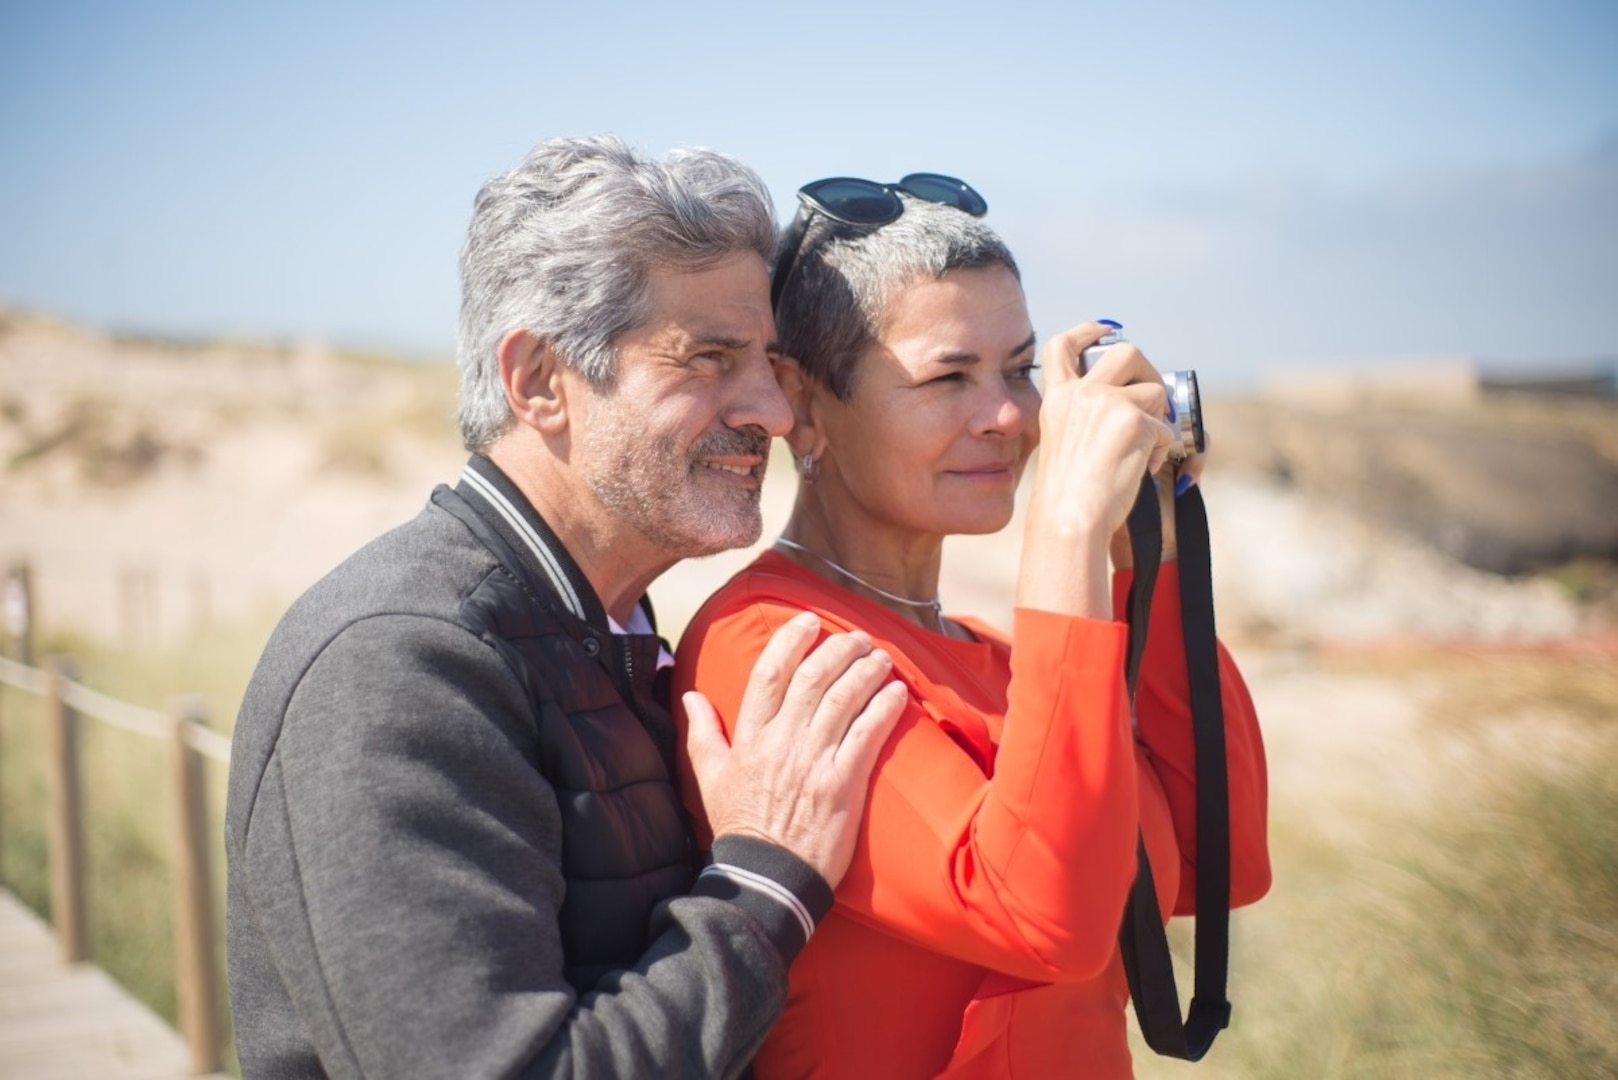 Man and woman use a camera outdoors